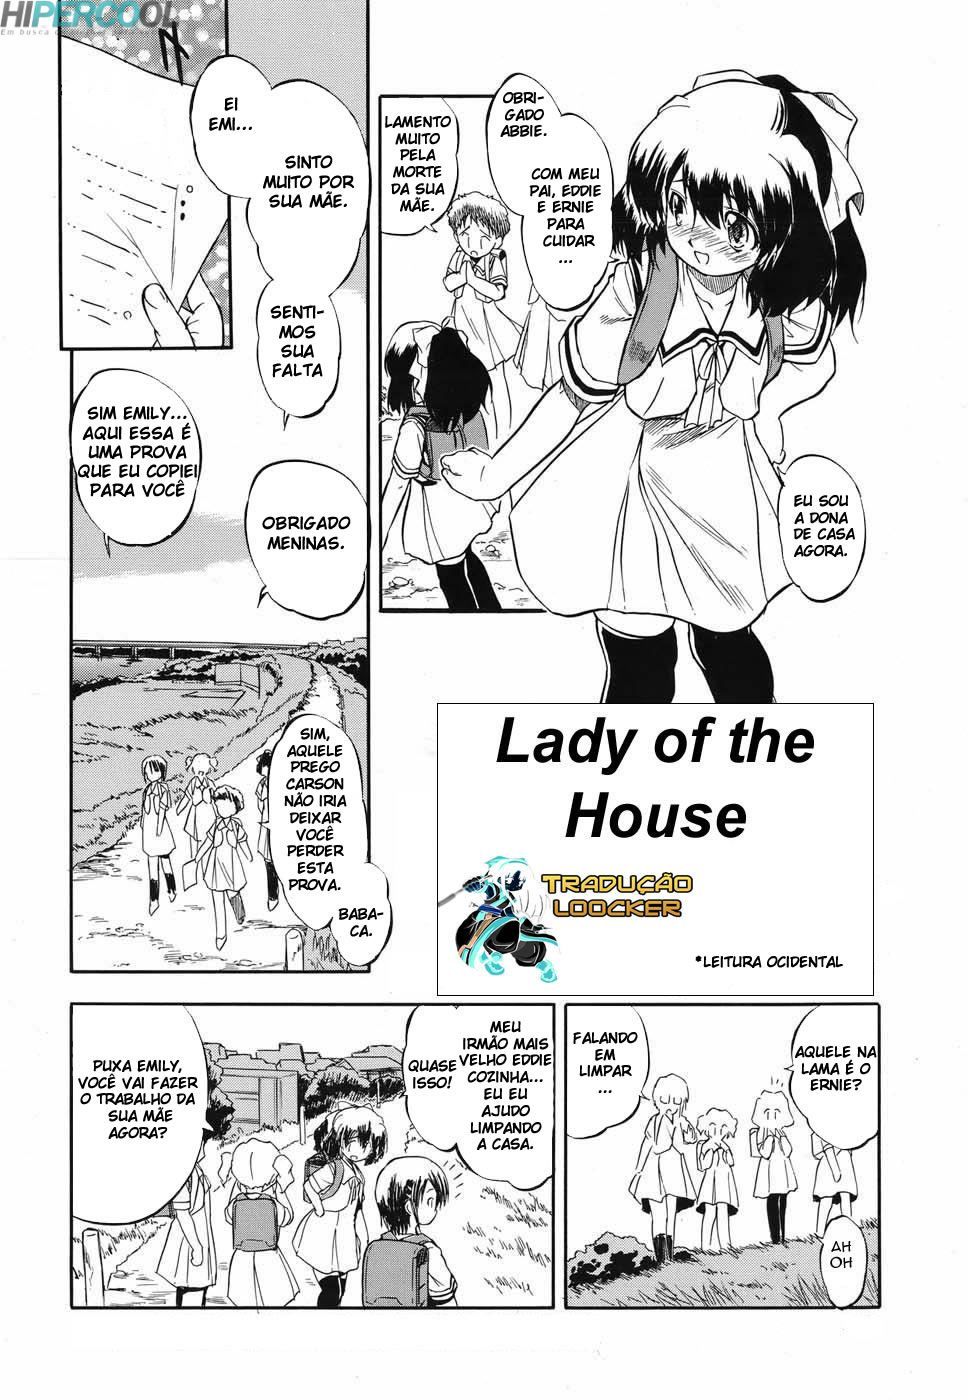 Hentaihome – Lady of the House (1)